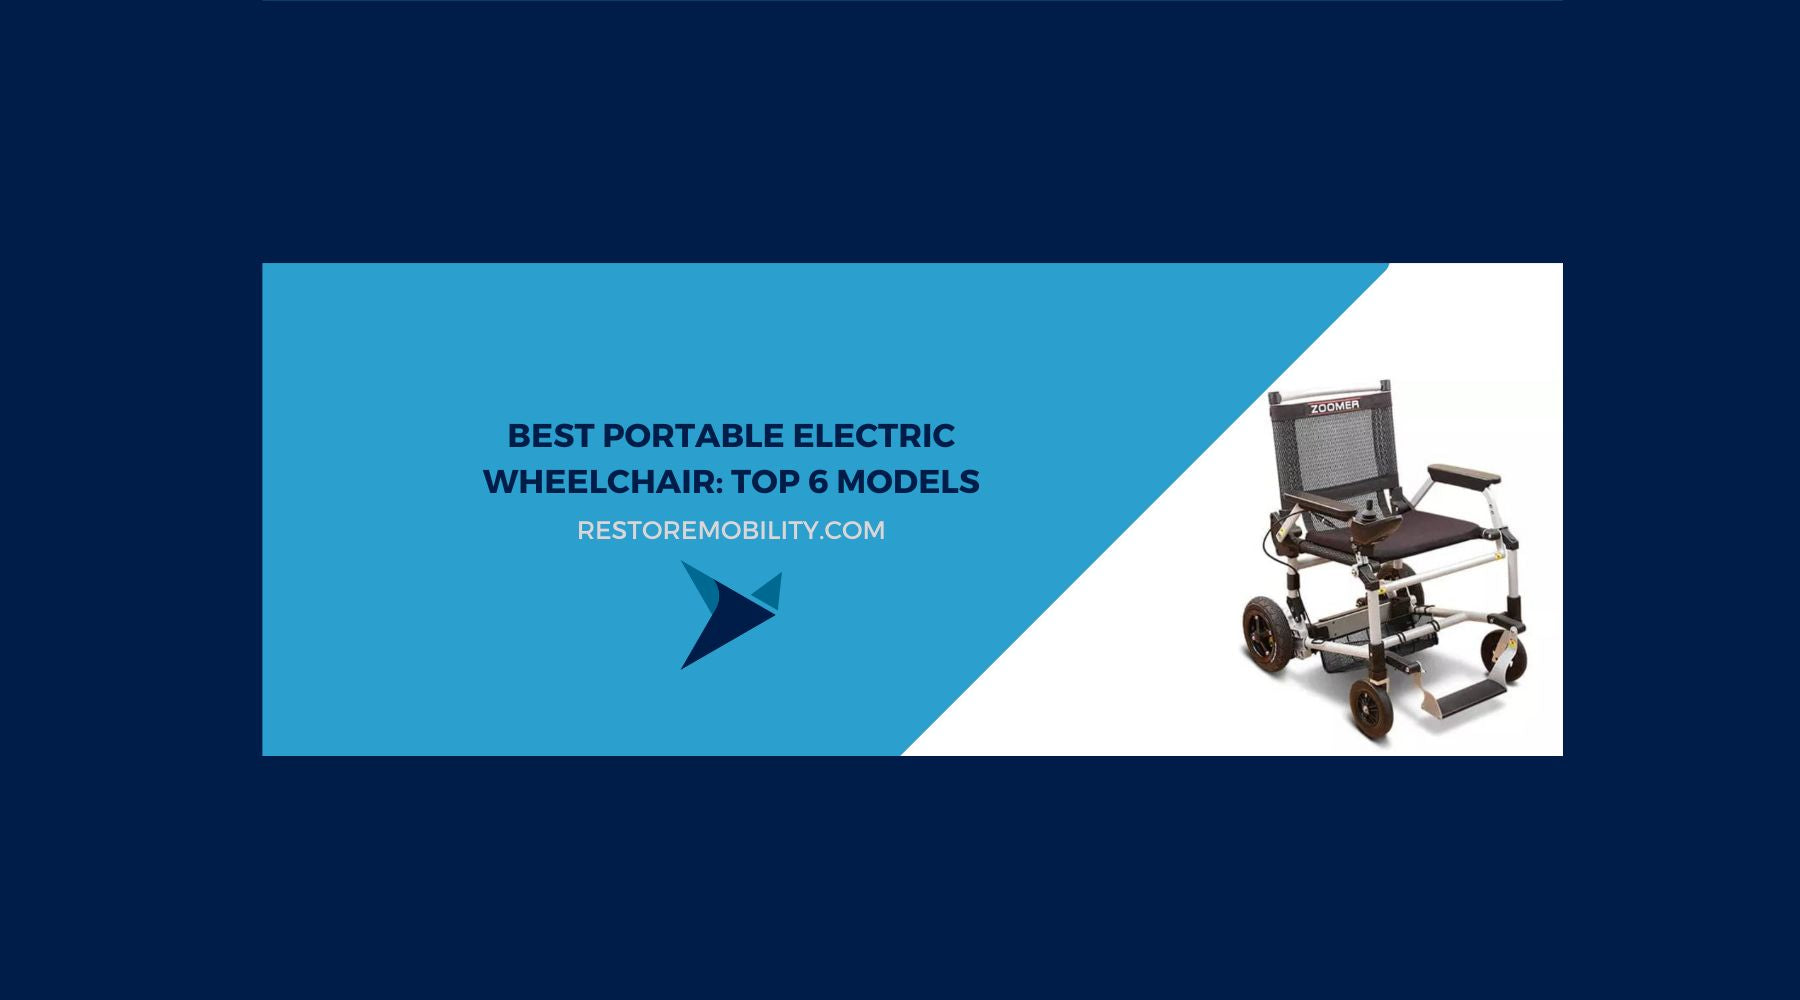 Best Portable Electric Wheelchair: Top 6 Models